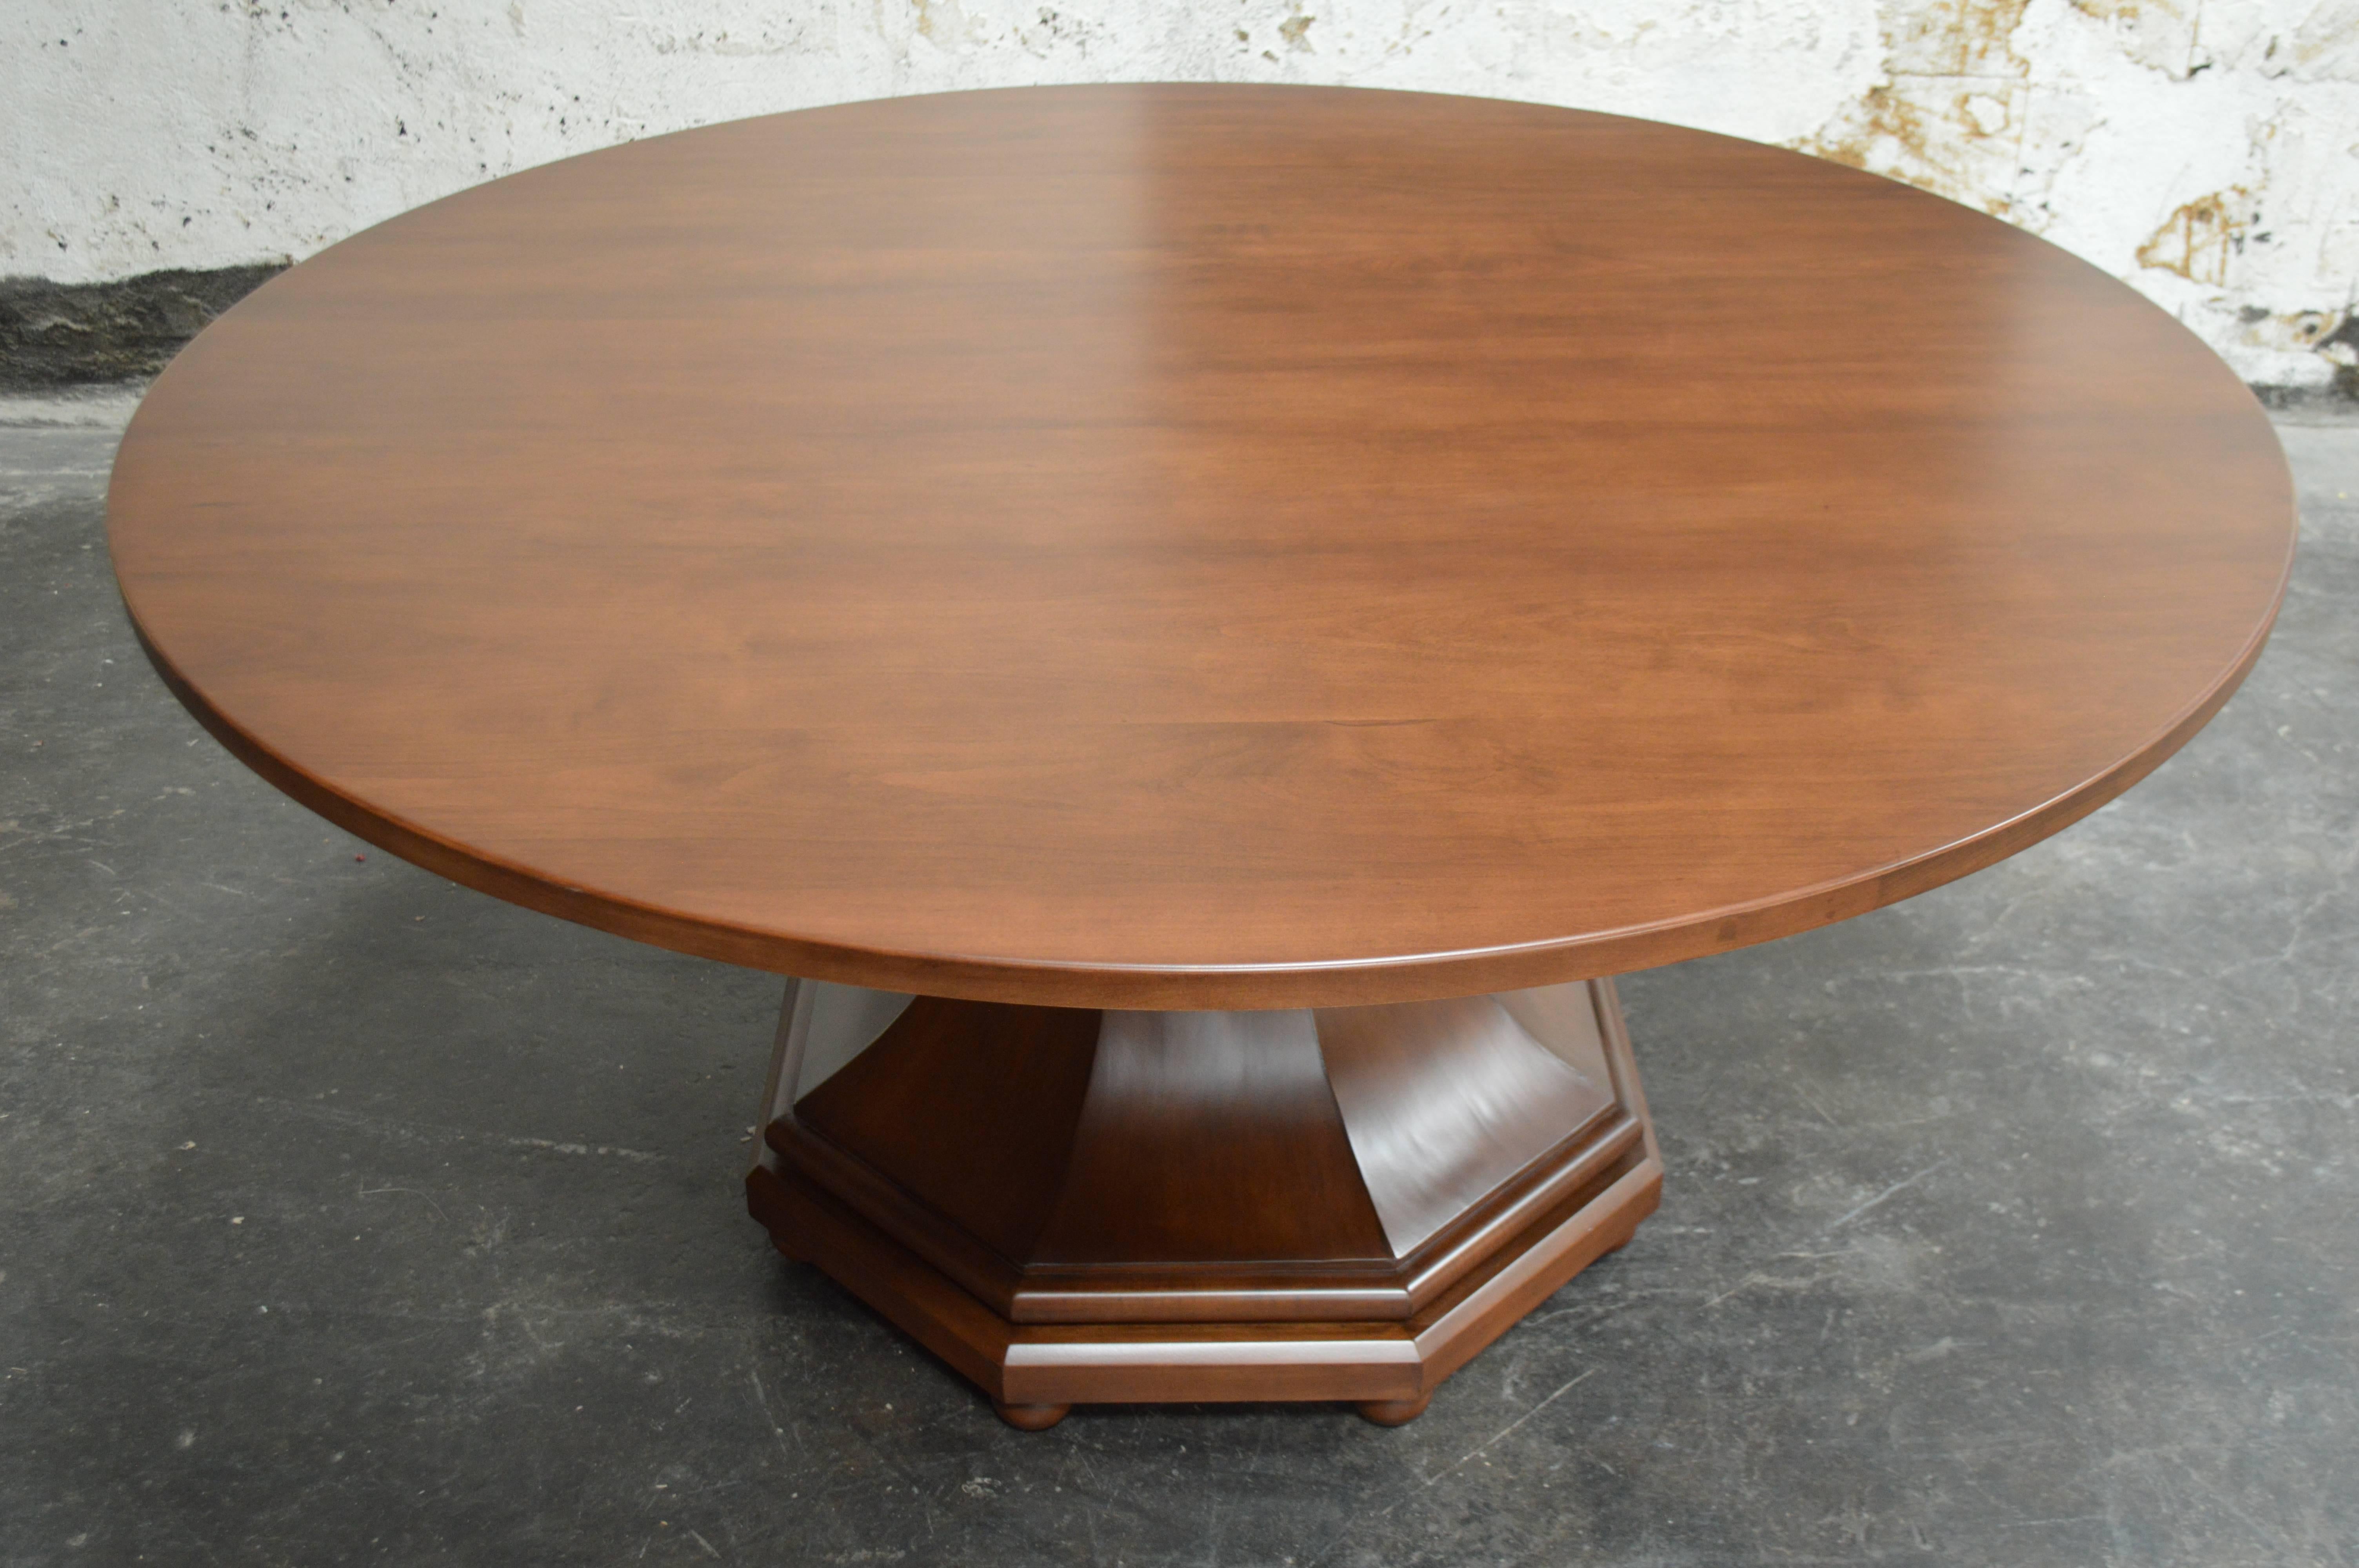 Handcrafted custom round dining table measuring 64